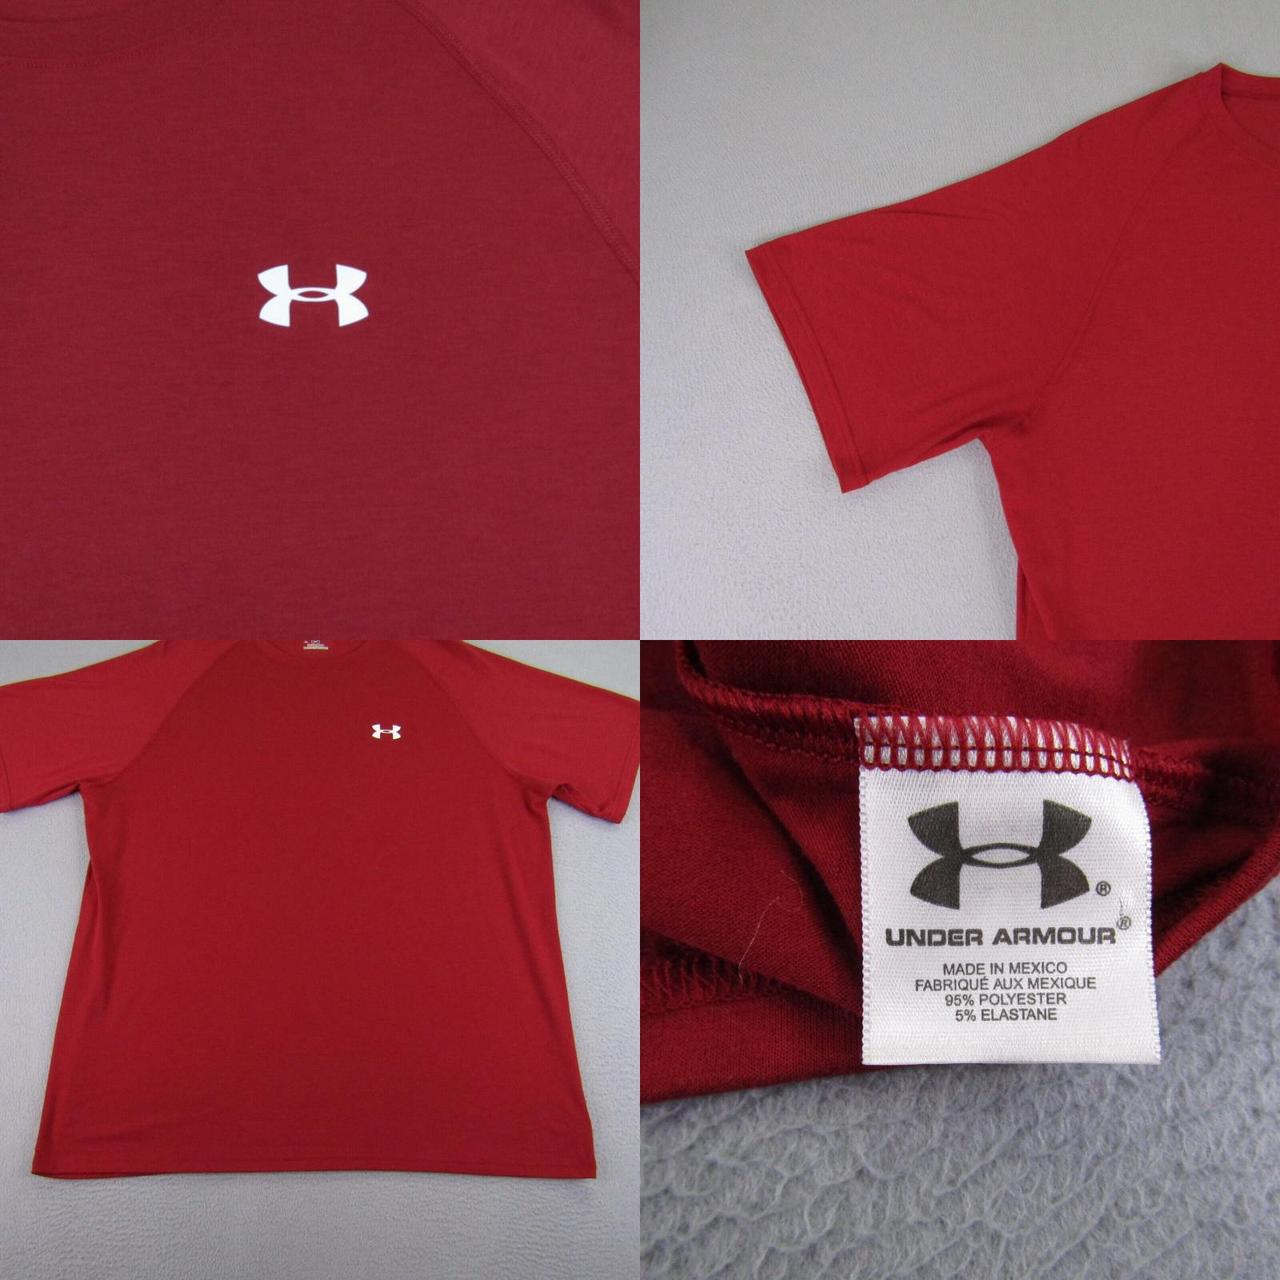 Under Armour Men's Red T-shirt (4)